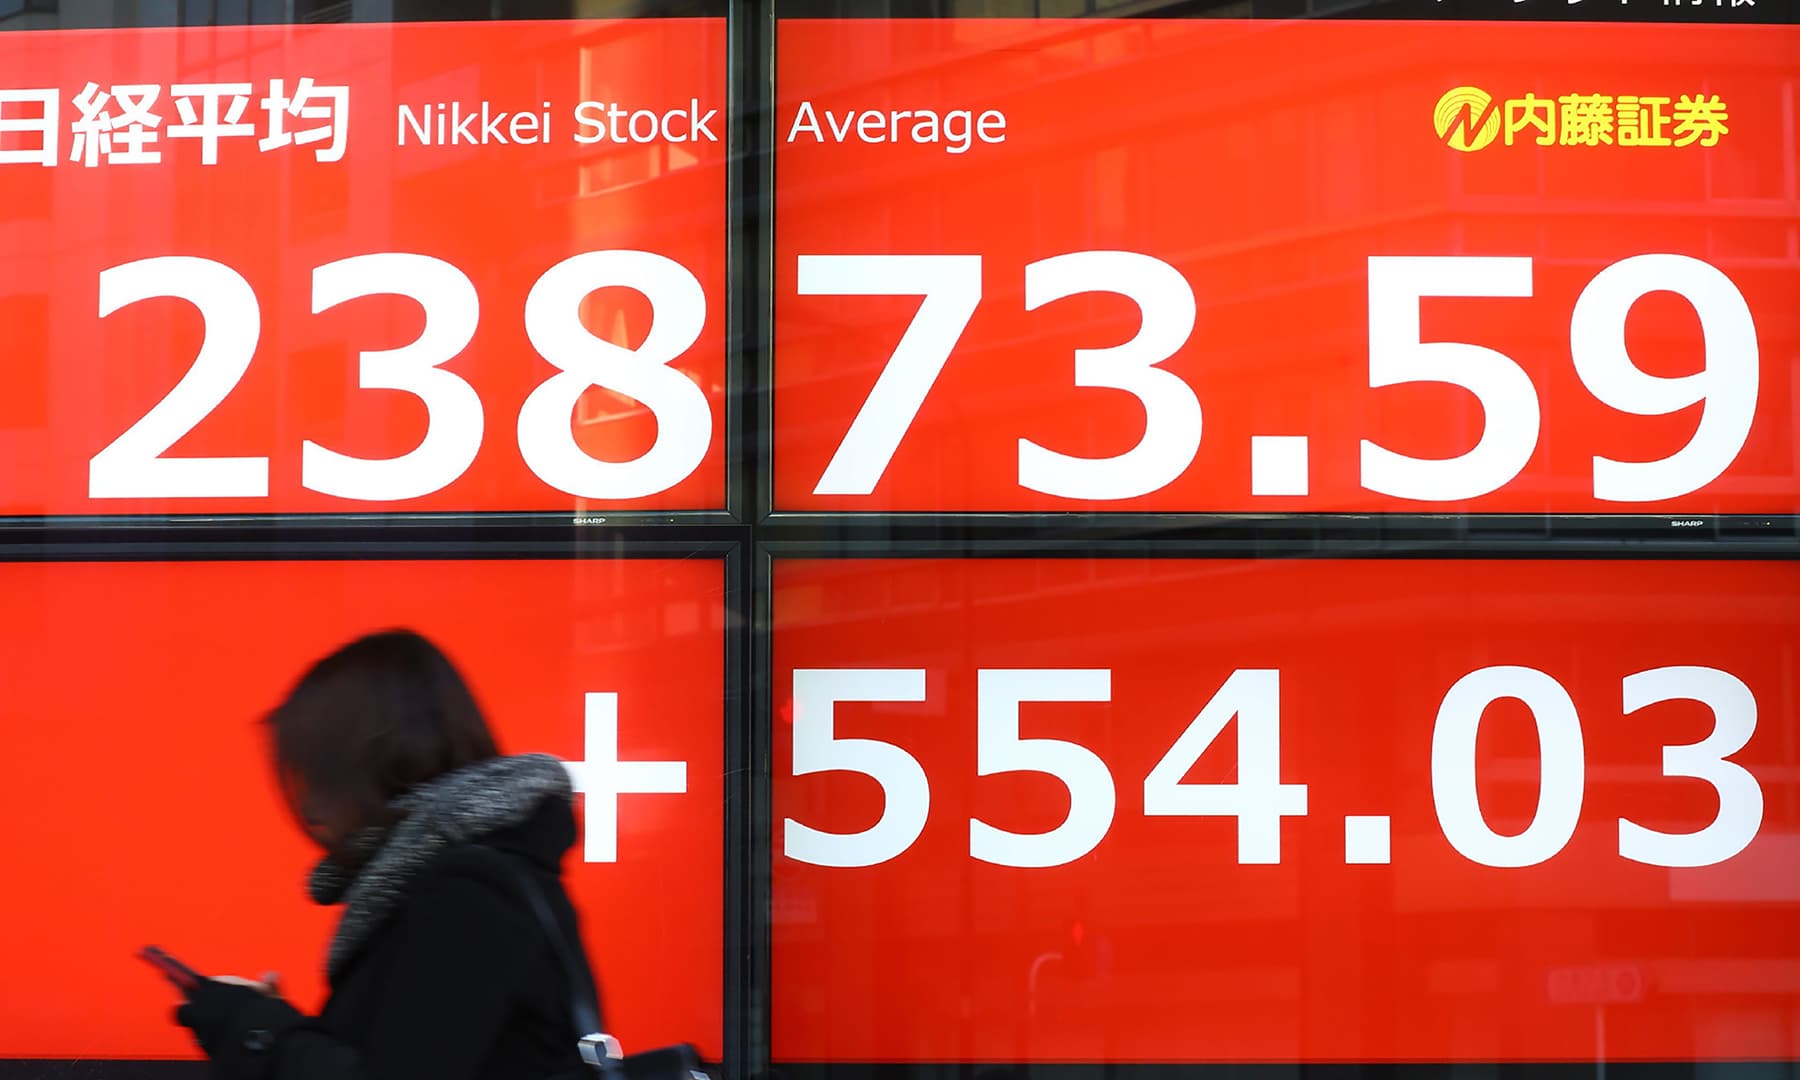 A pedestrian walks past a stock indicator displaying share prices on the Tokyo Stock Exchange in Tokyo on February 6, 2020. - Tokyo stocks closed more than two percent higher on February 6, boosted by record-setting advances on Wall Street on strong US economic data and hopes over containing the deadly new coronavirus. (Photo by STR / JIJI PRESS / AFP) / Japan OUT